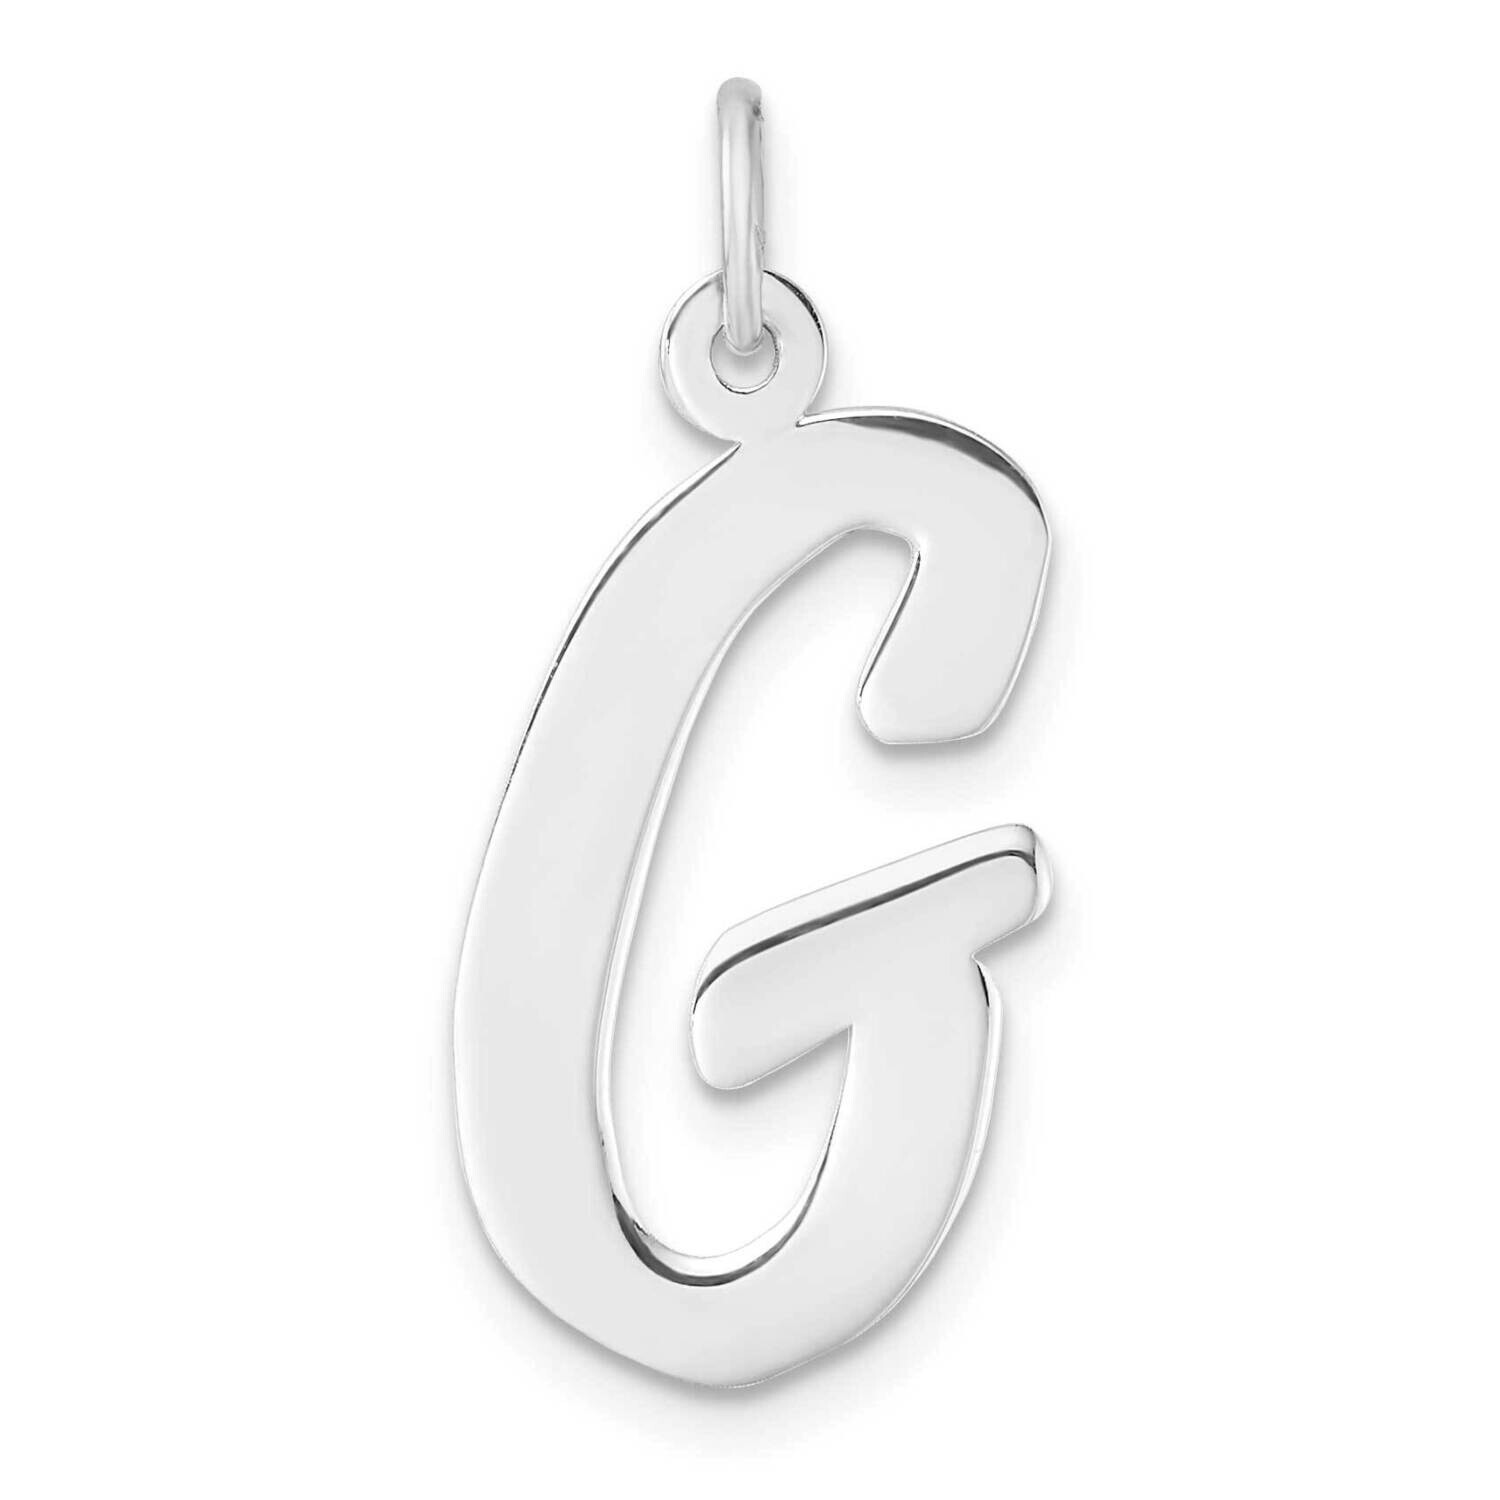 Large Script Letter G Initial Charm Sterling Silver Rhodium-Plated QC11253G